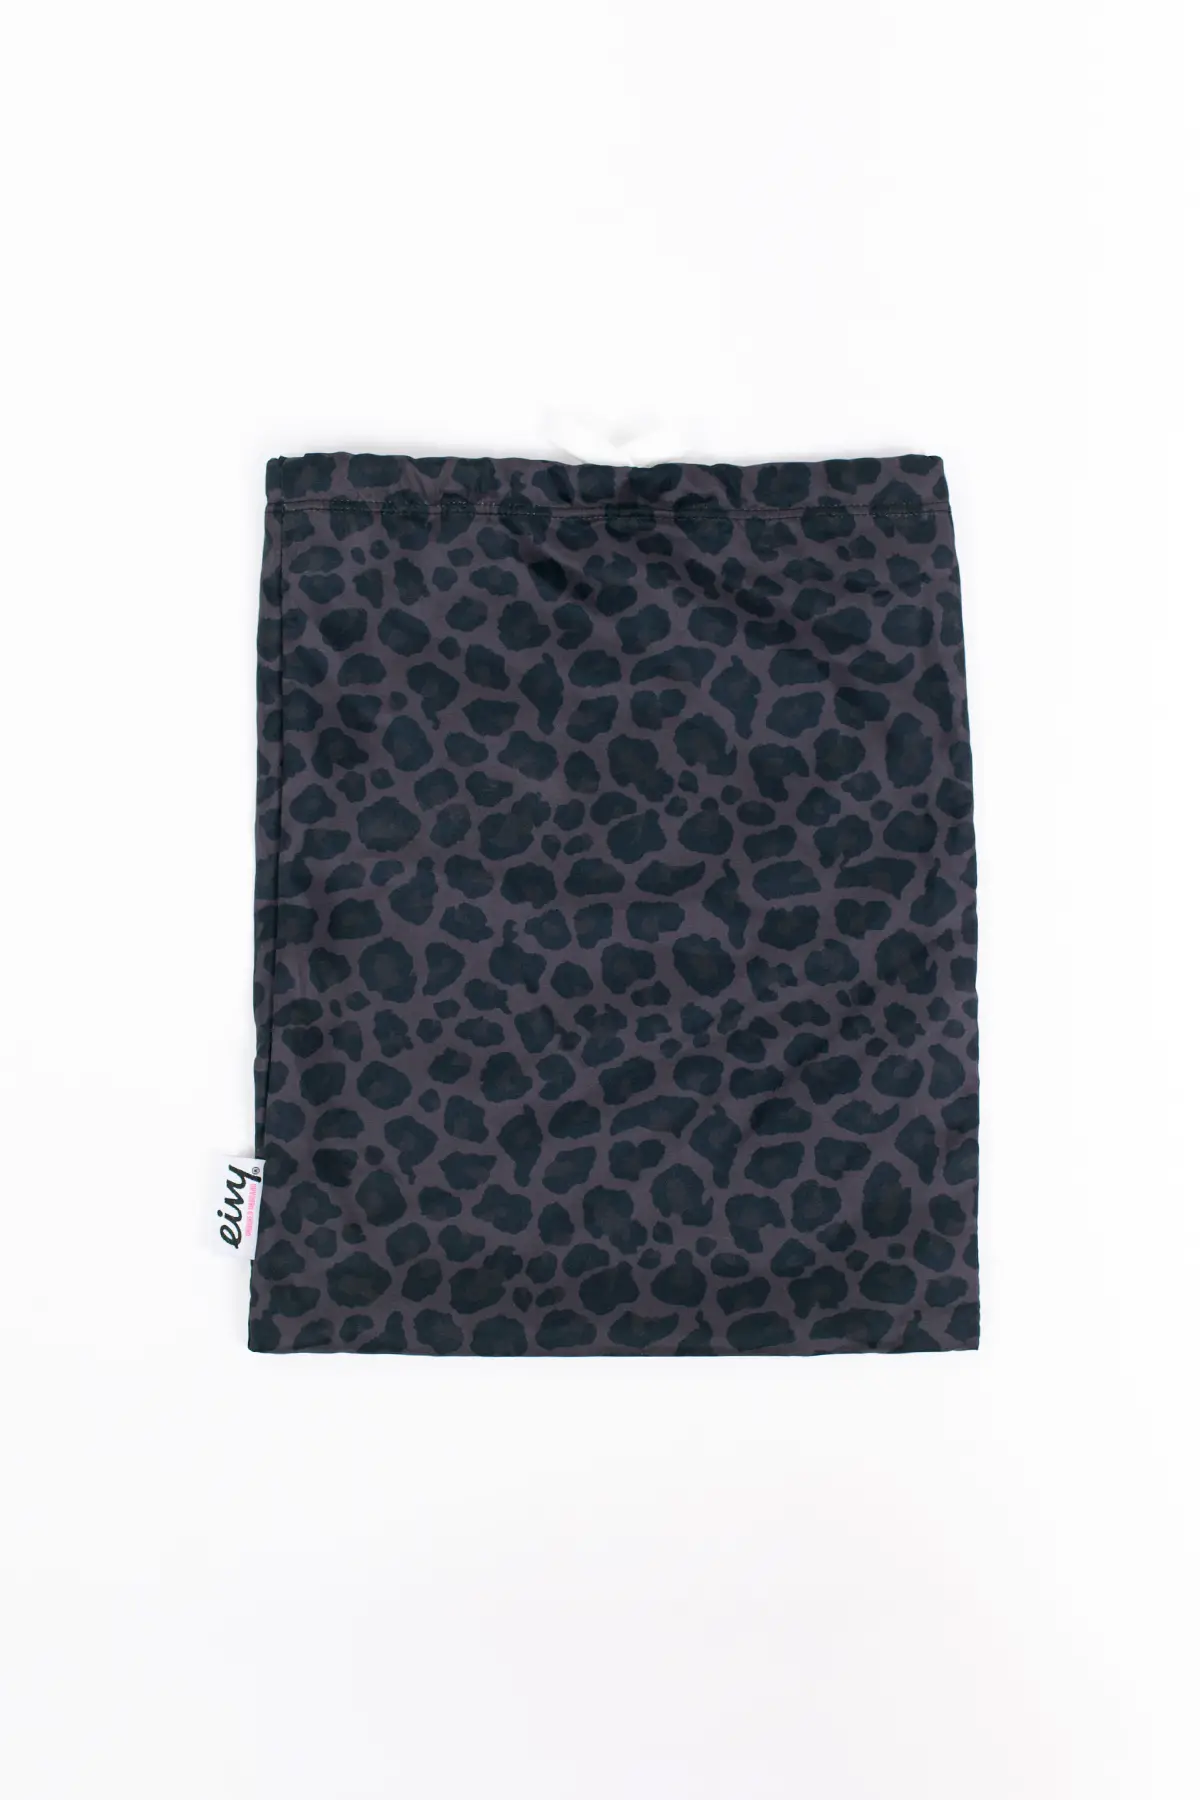 Icecold Top - Black Leopard | M